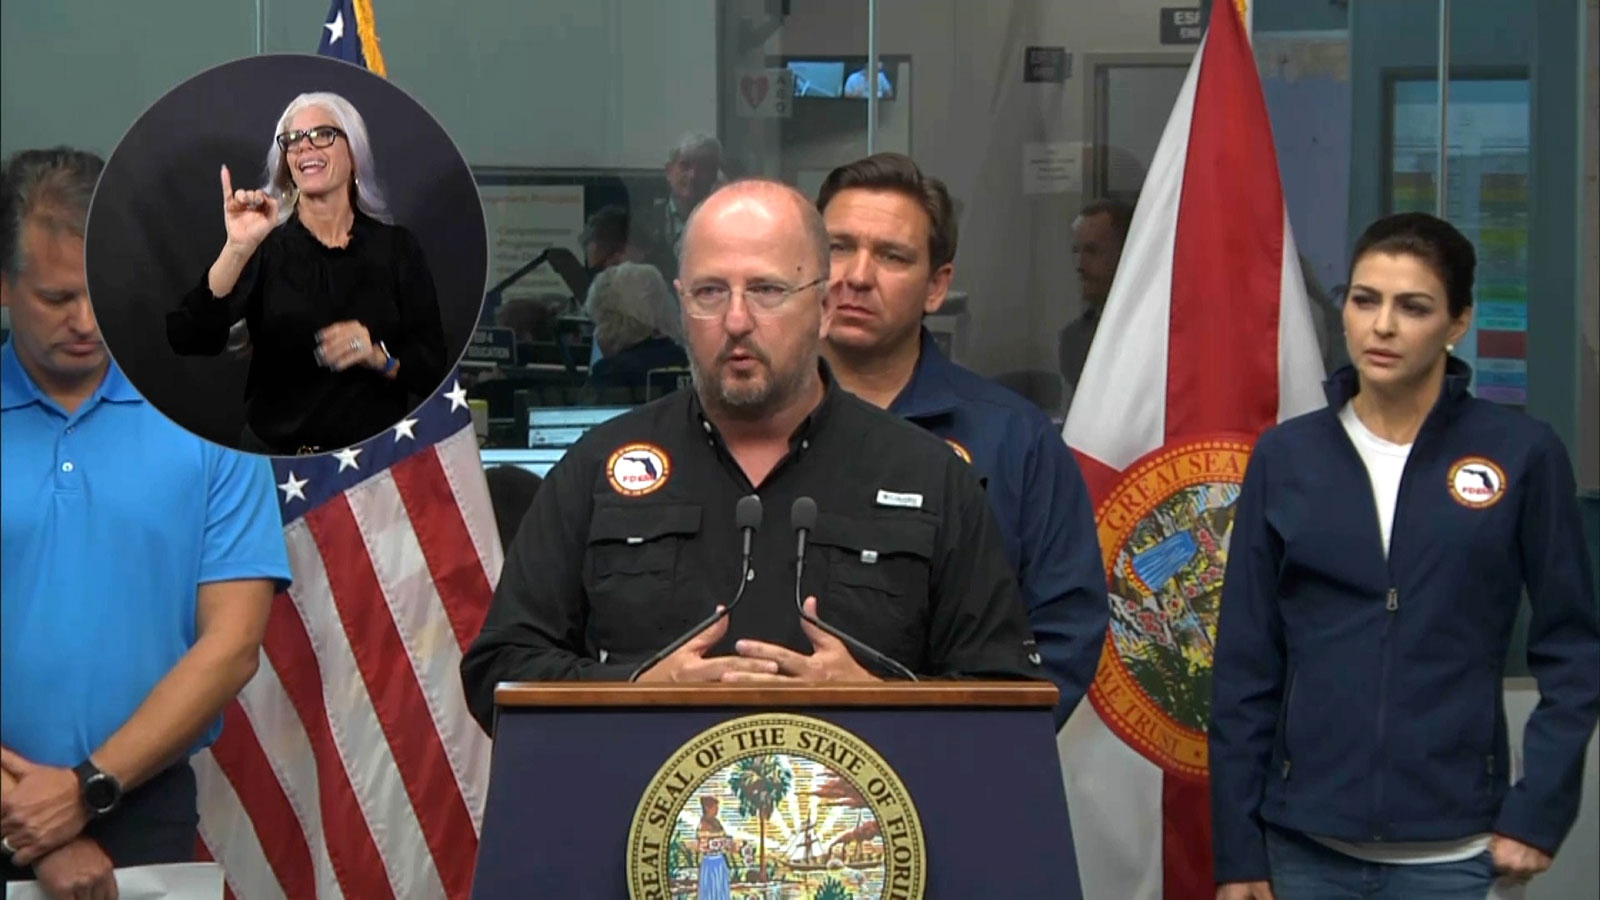 UPDATE 9/17: Emergency Disaster Services Responds to Hurricane